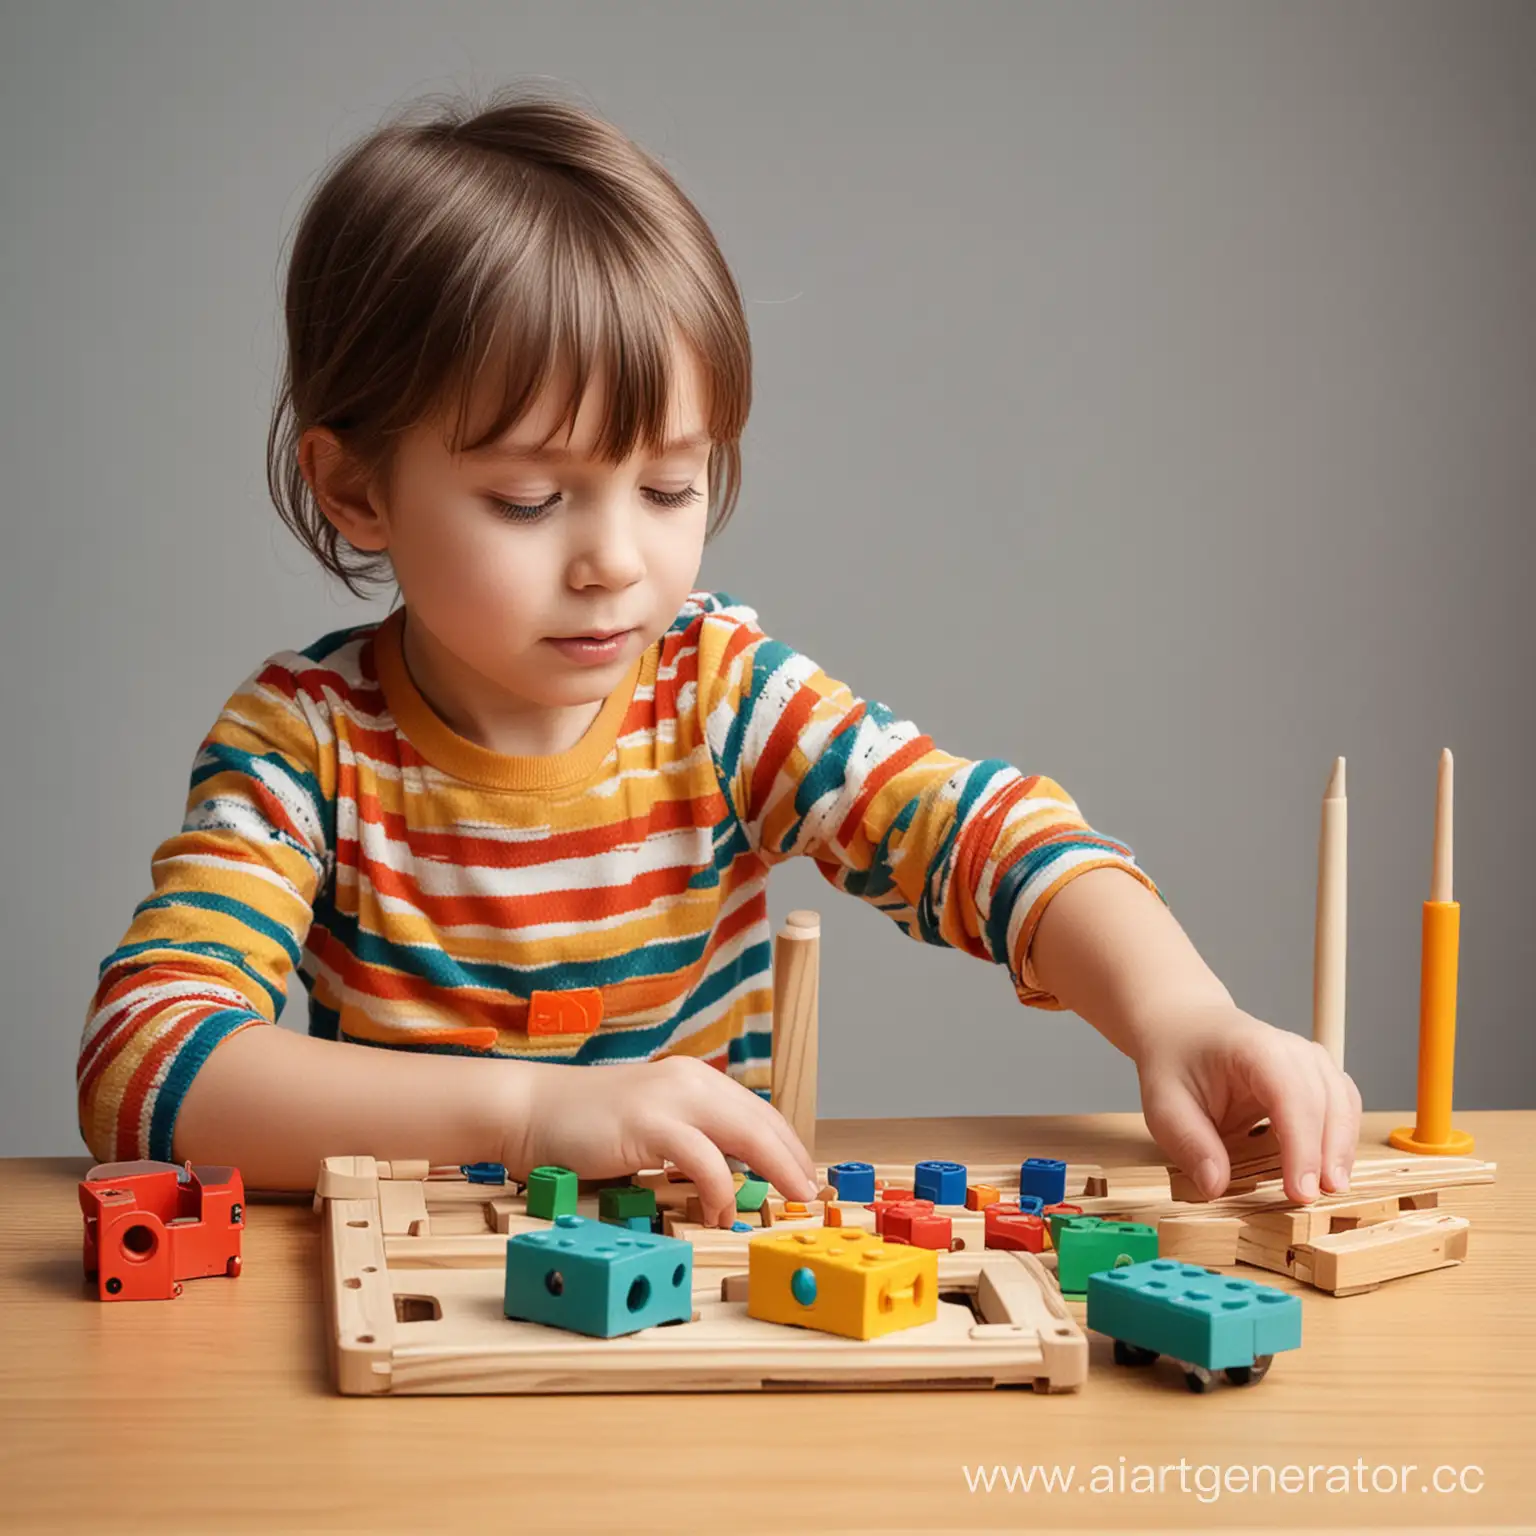 Young-Child-Engaging-with-Educational-Toys-for-Cognitive-Development